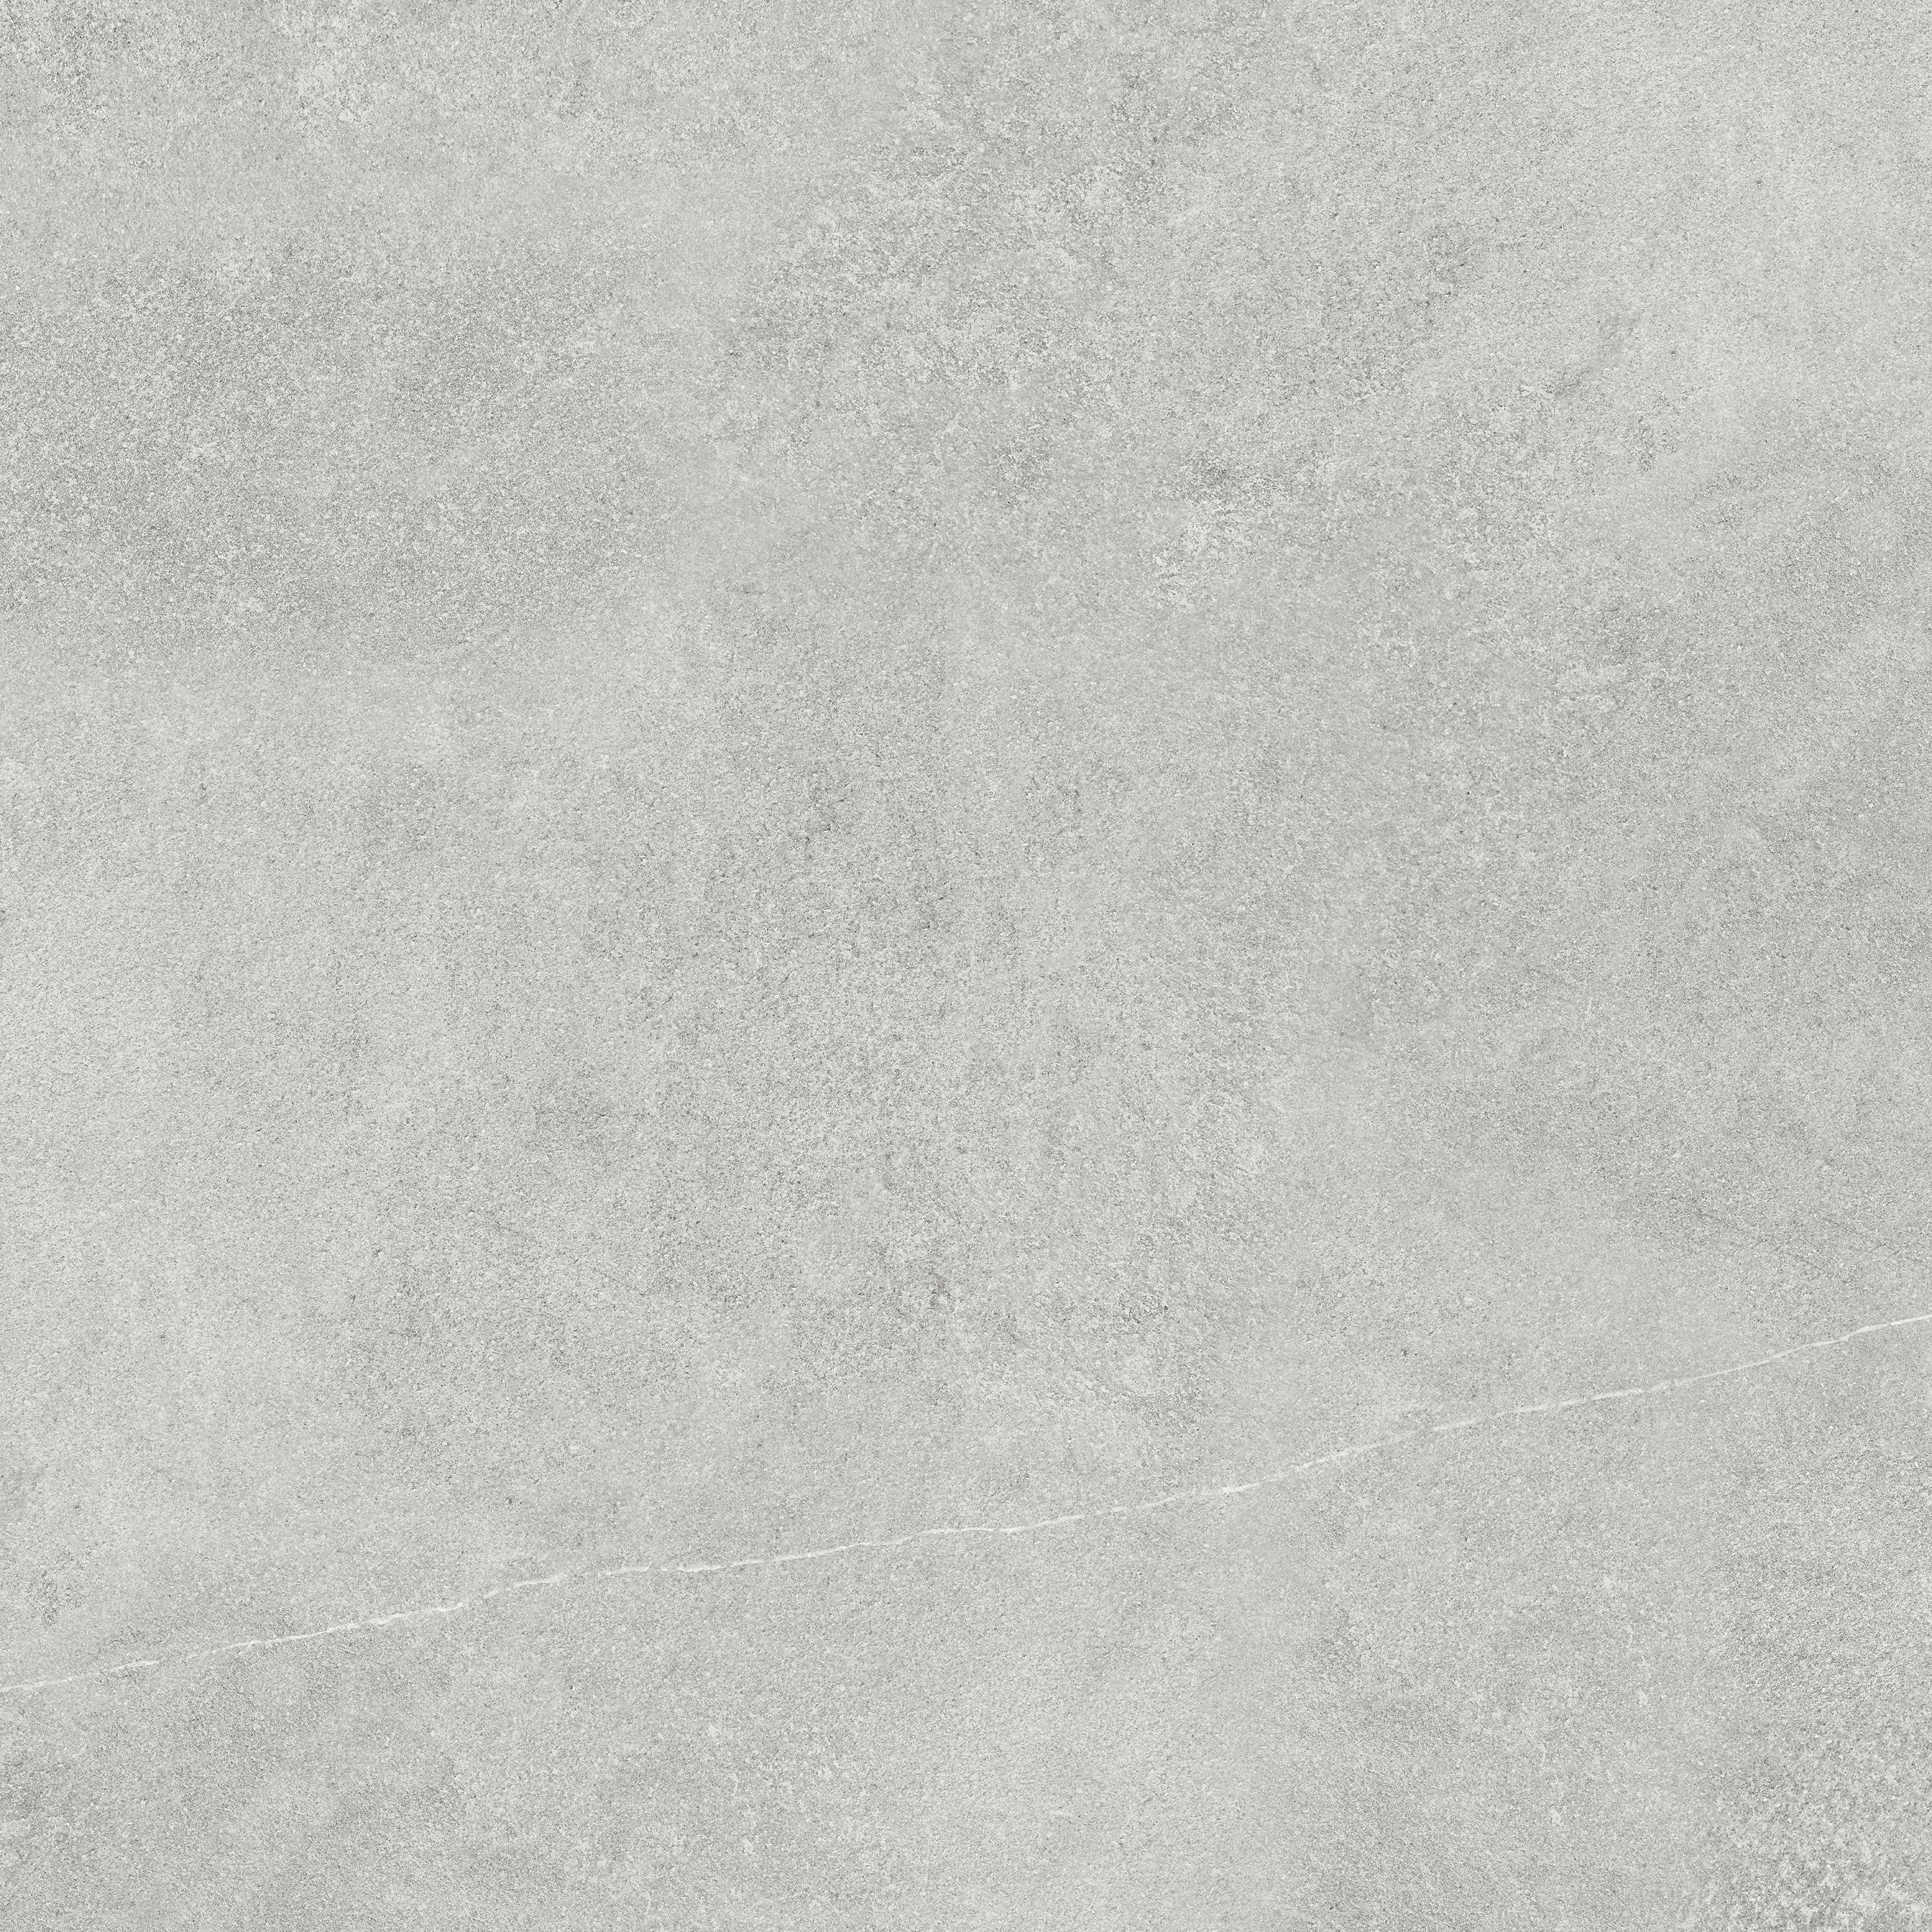 ash pattern color body porcelain field tile from mjork anatolia collection distributed by surface group international matte finish rectified edge 32x32 square shape